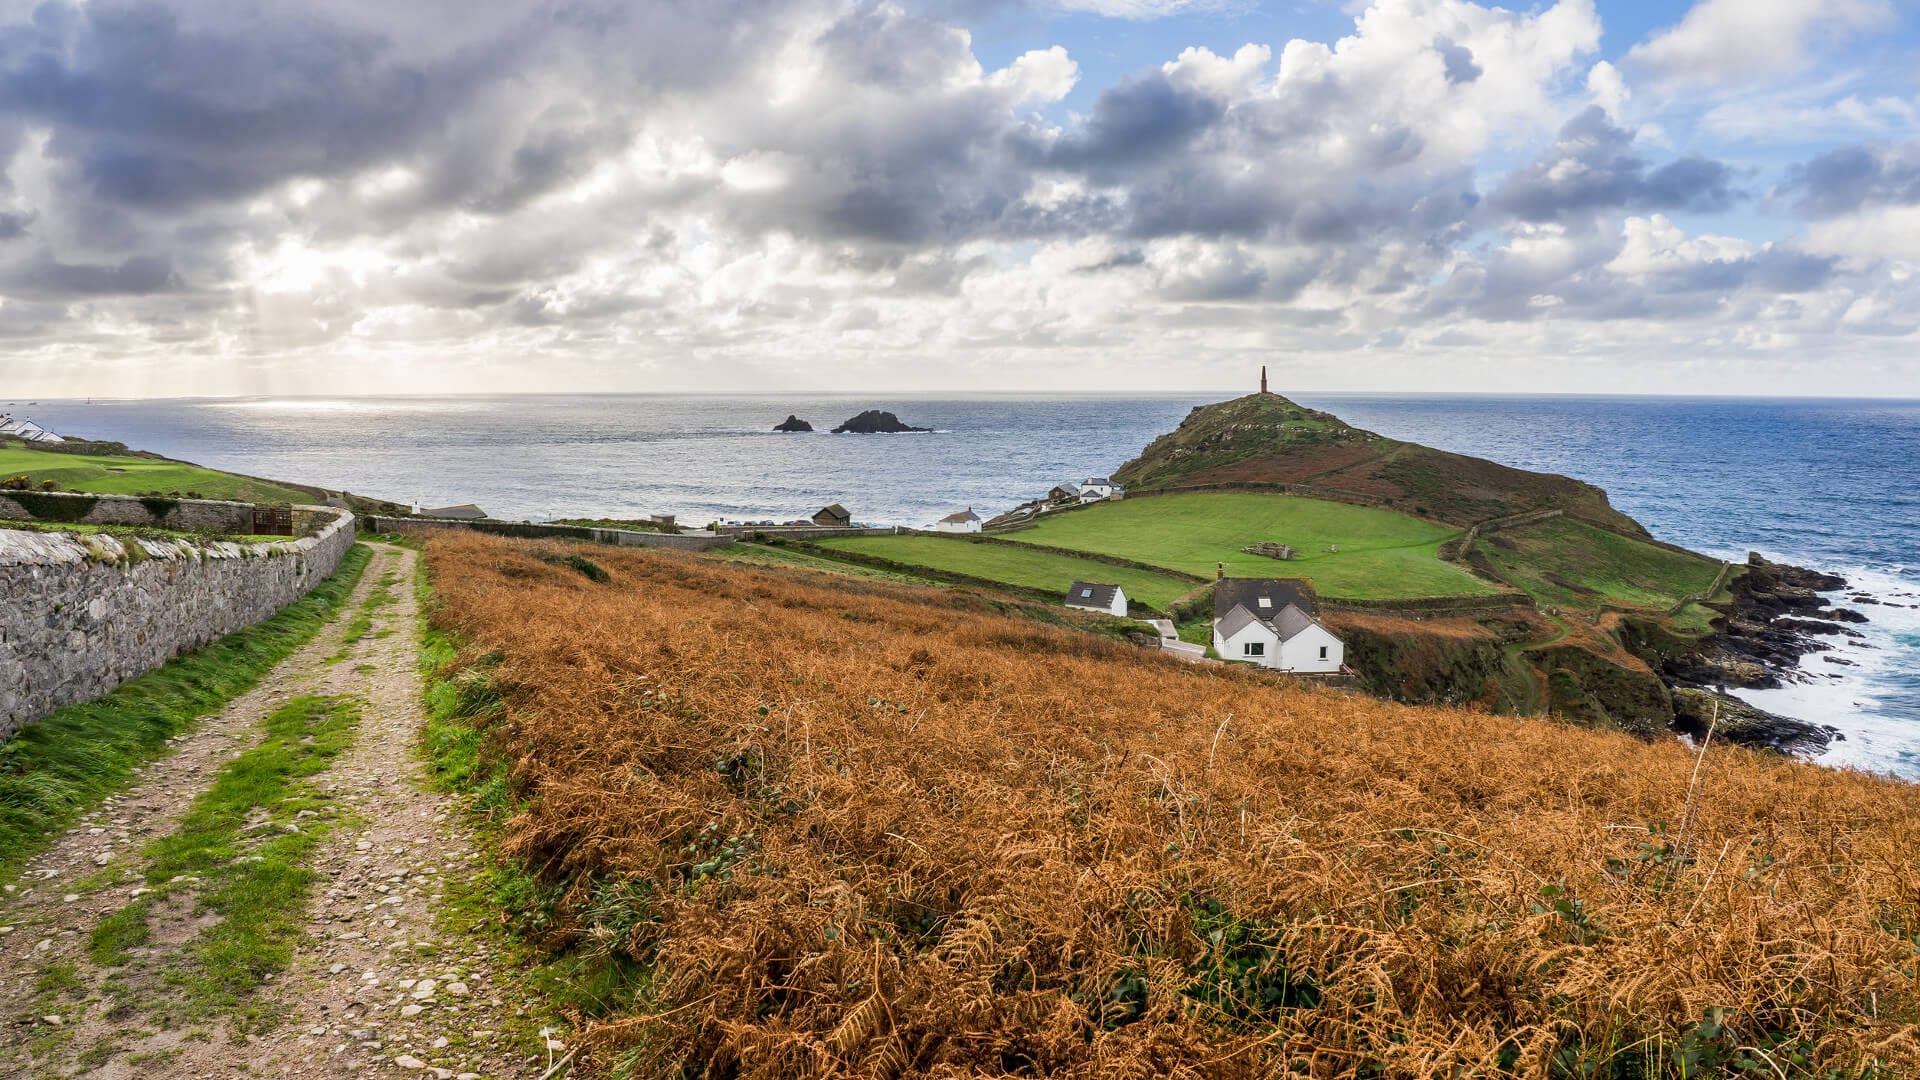 Poldark was set to a backdrop of fantastic scenery on the south west coastal path